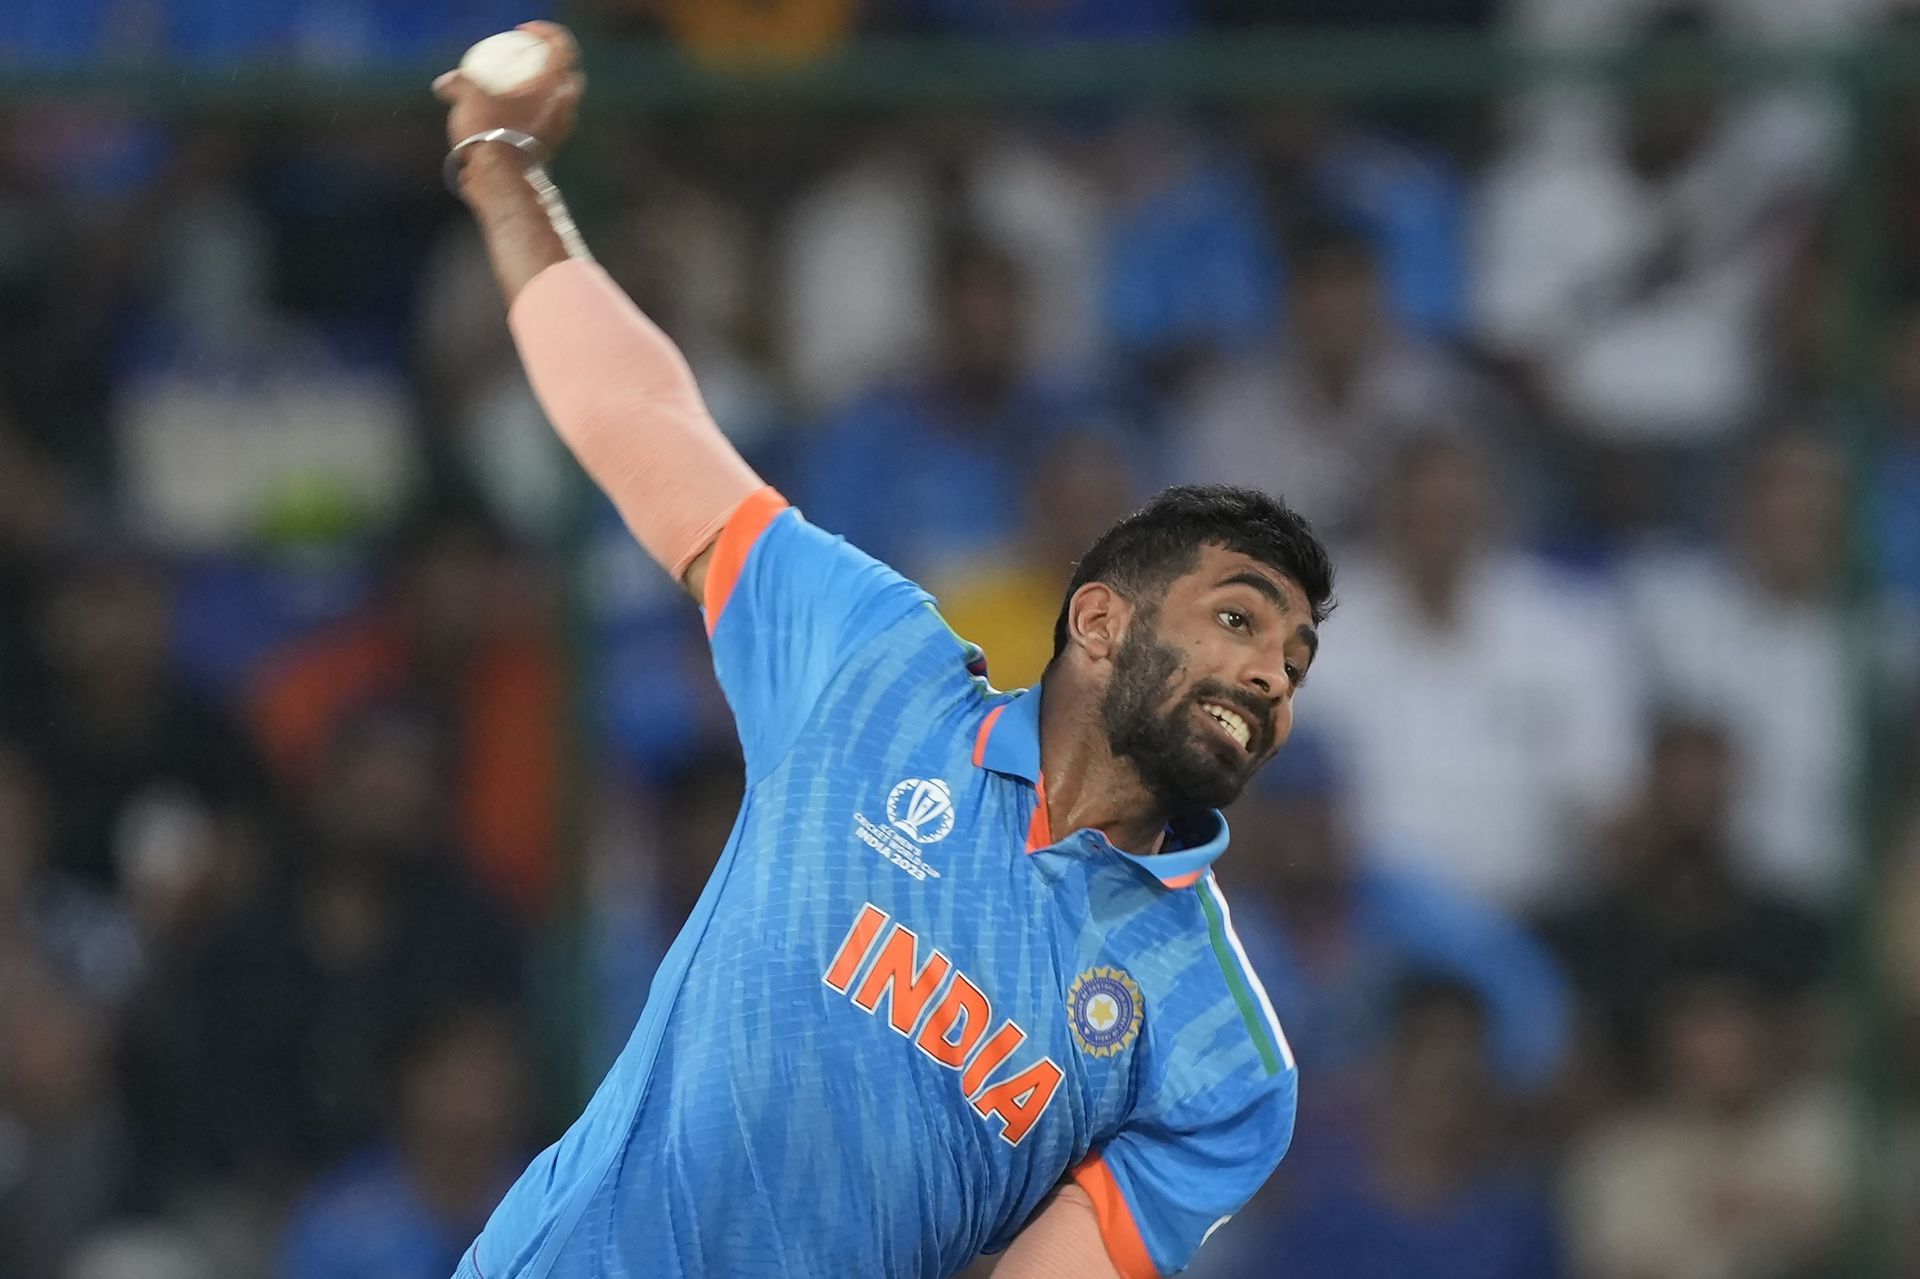 Jasprit Bumrah is known for his lethal yorkers and slower ones at the death. [P/C: AP]